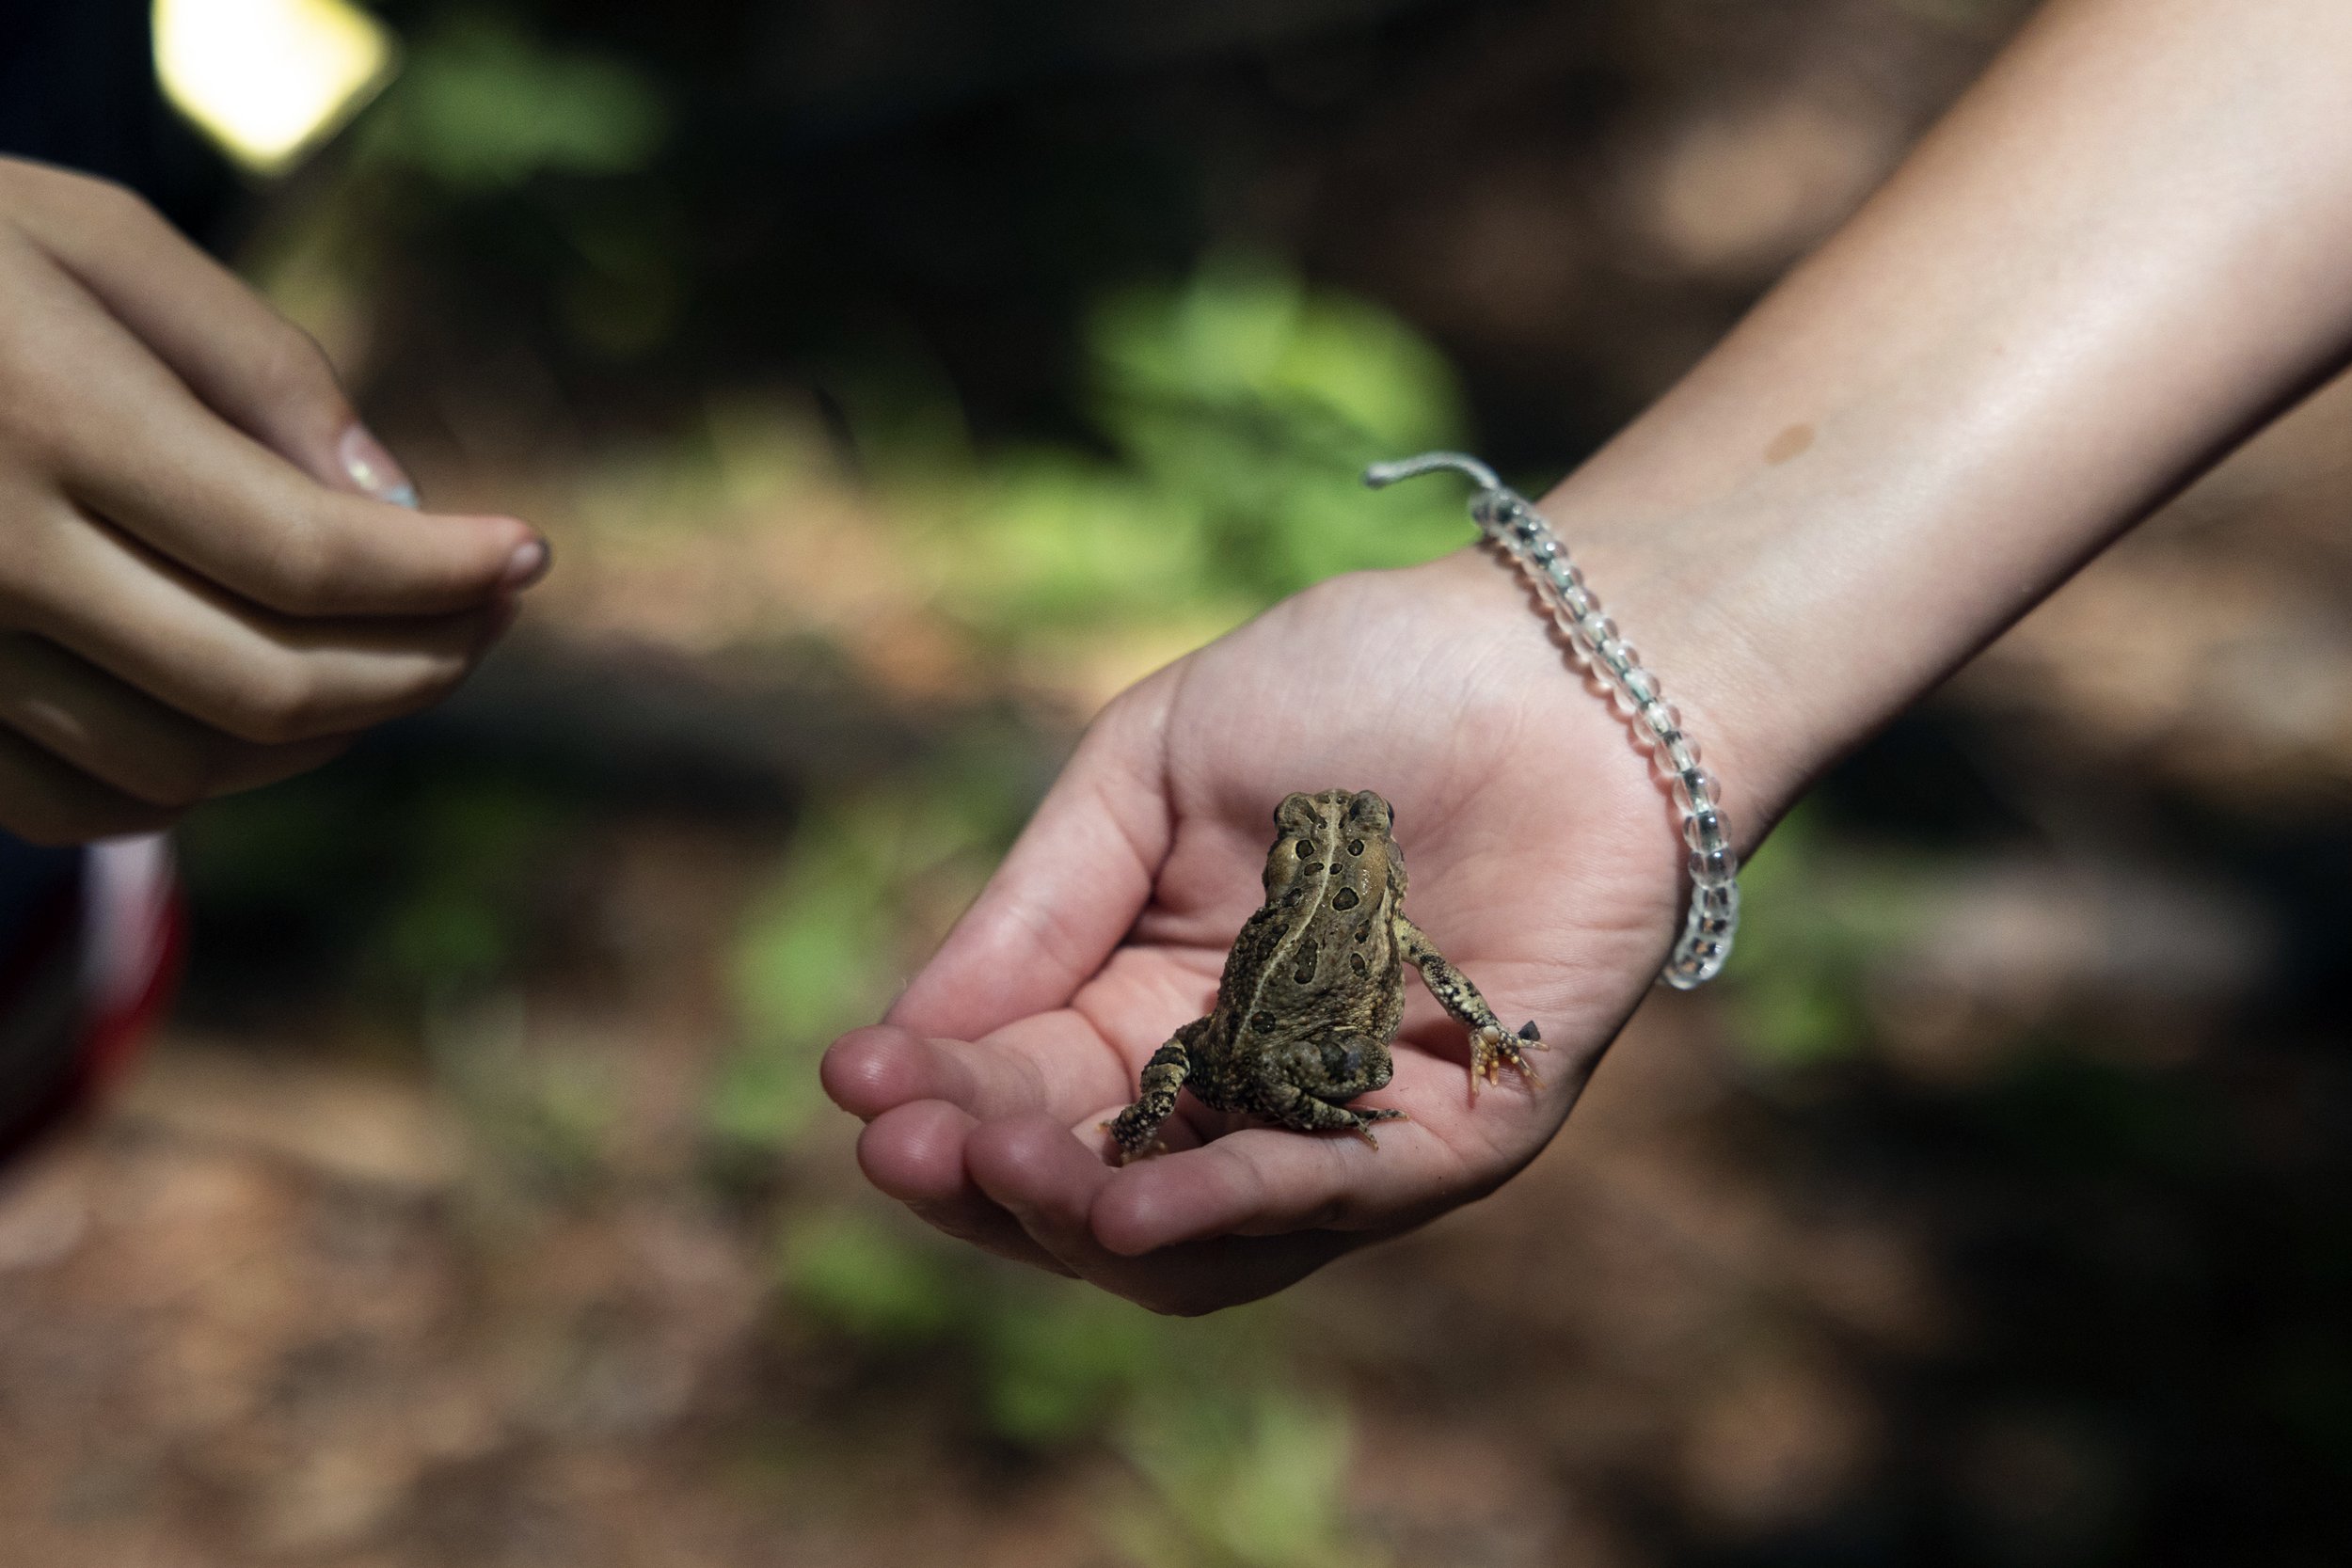  Cash (he/him) finds a toad in the woods on June 17, 2022. 